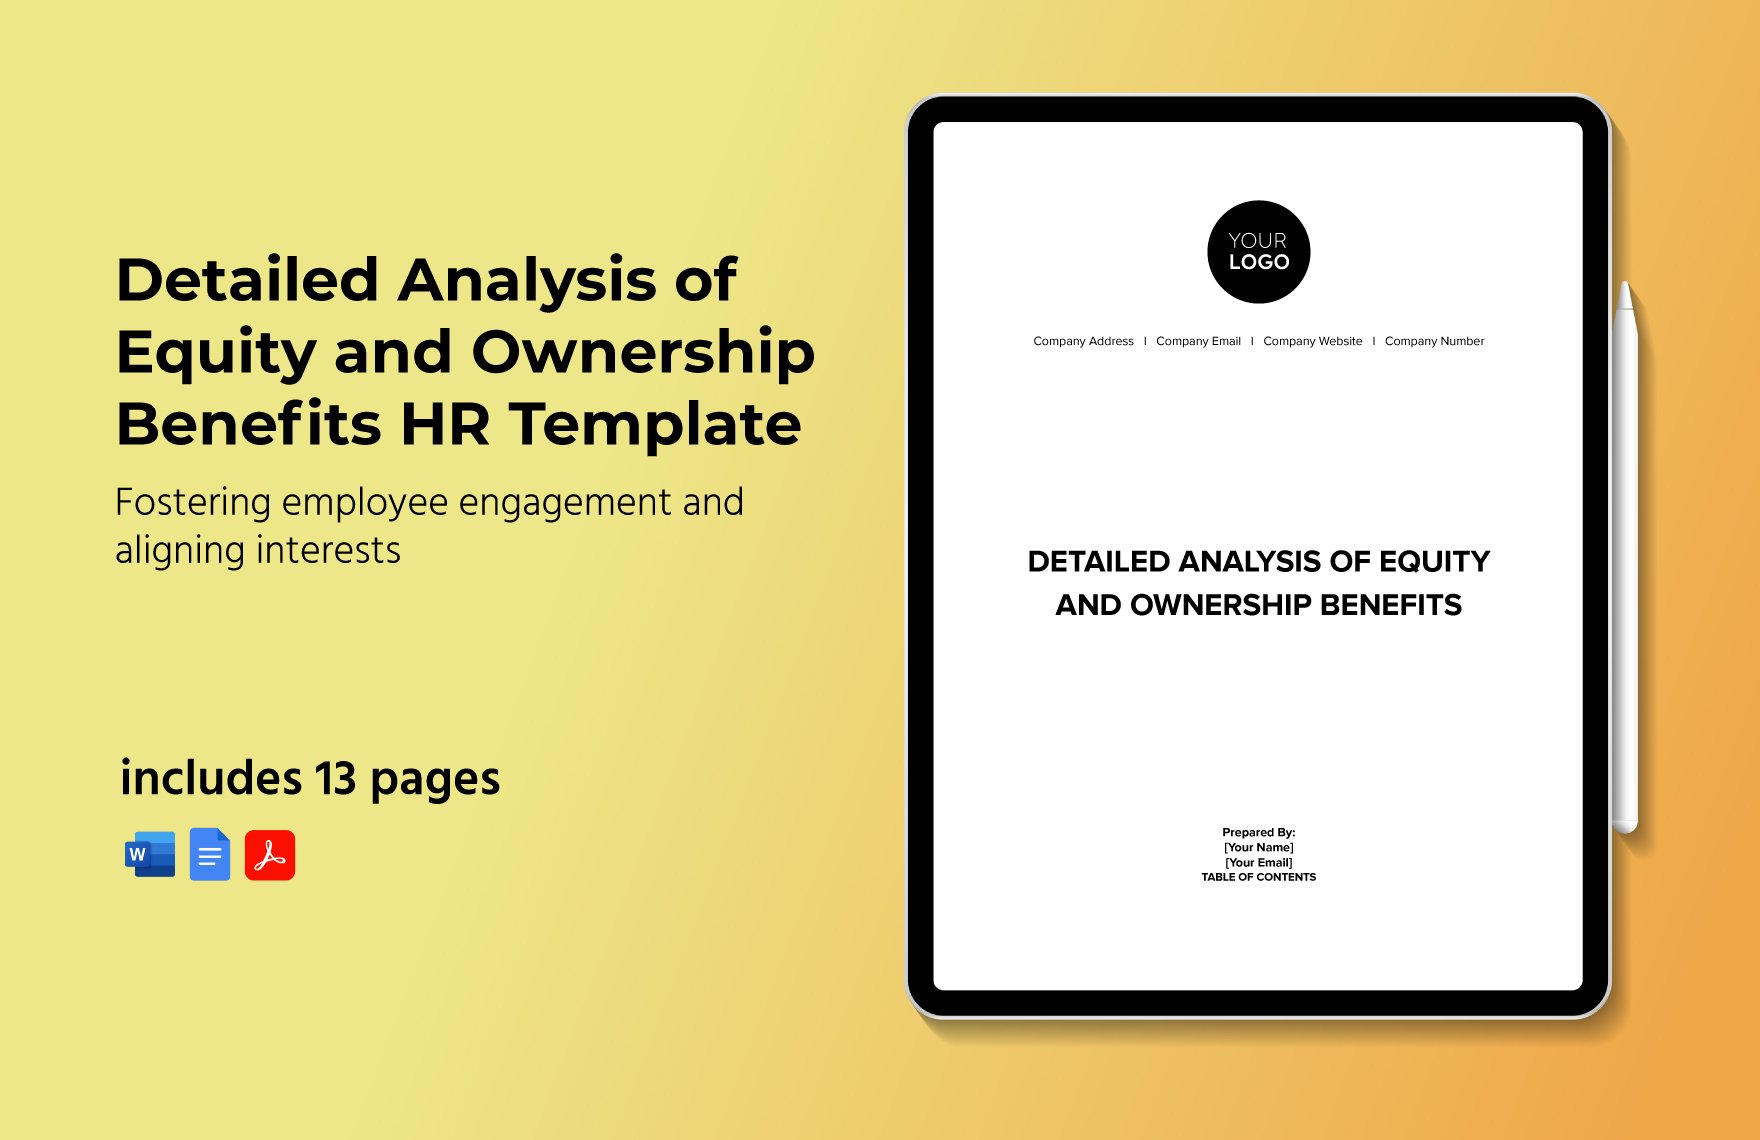 Detailed Analysis of Equity and Ownership Benefits HR Template